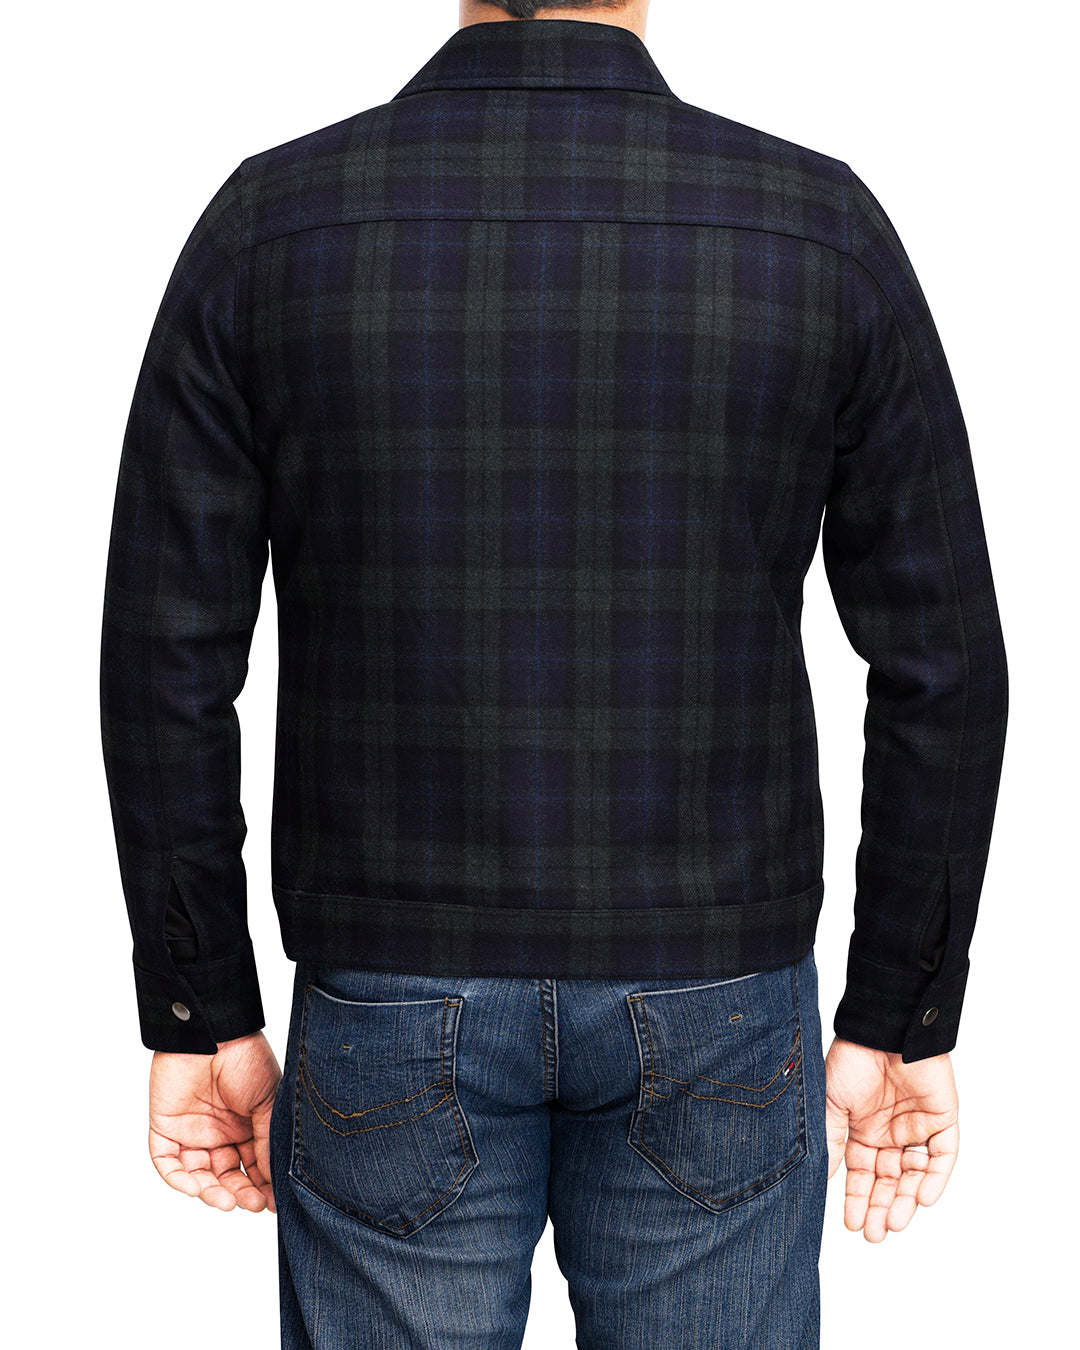 Back of the wool shirt jacket for men by Luxire in checks